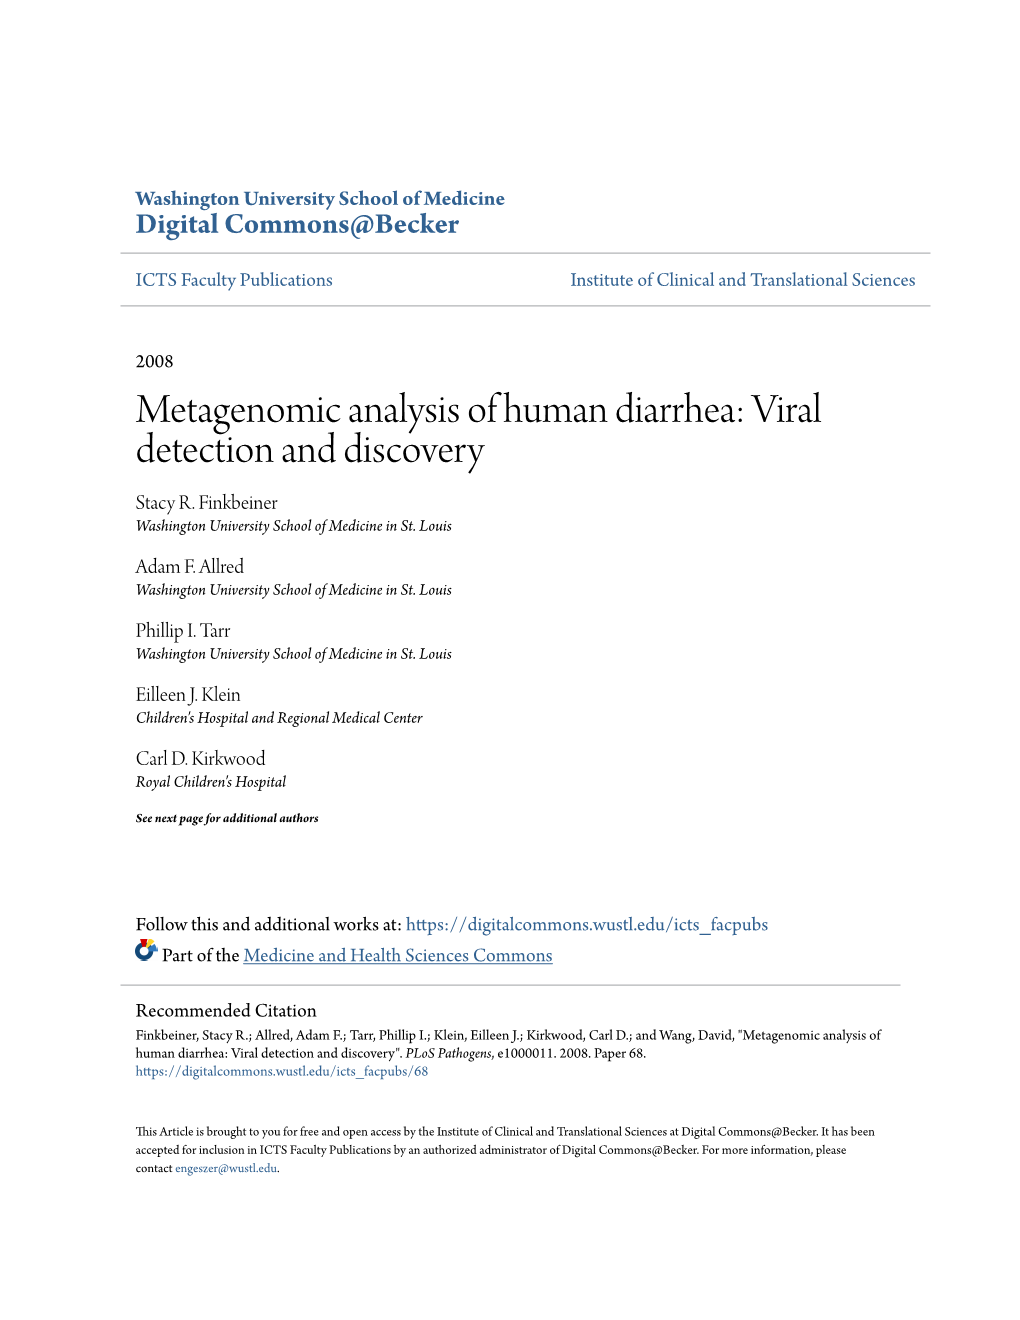 Metagenomic Analysis of Human Diarrhea: Viral Detection and Discovery Stacy R